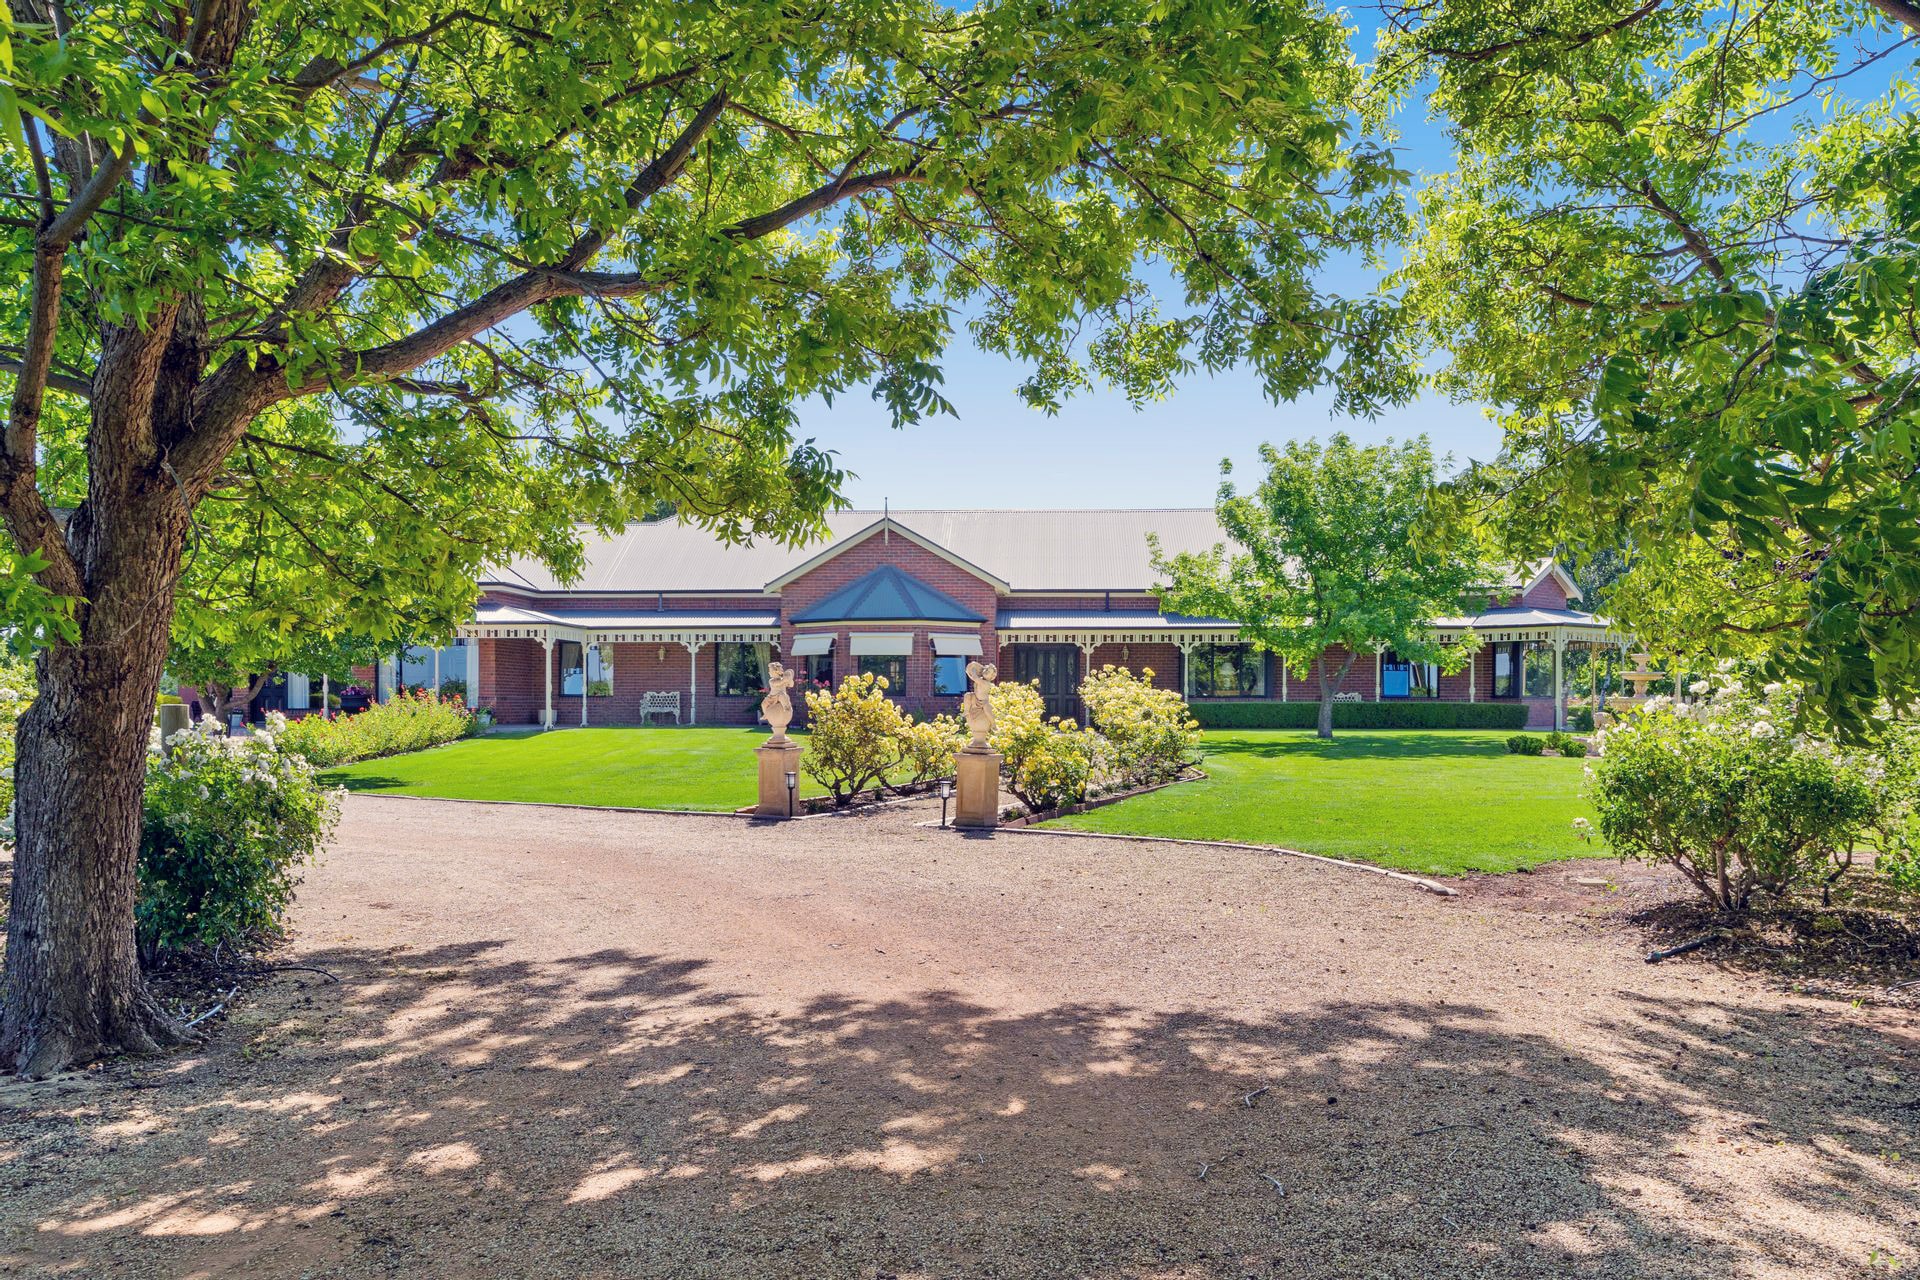 Set amongst a fabulously maintained vineyard and equine facilities, this property is one of a kind.